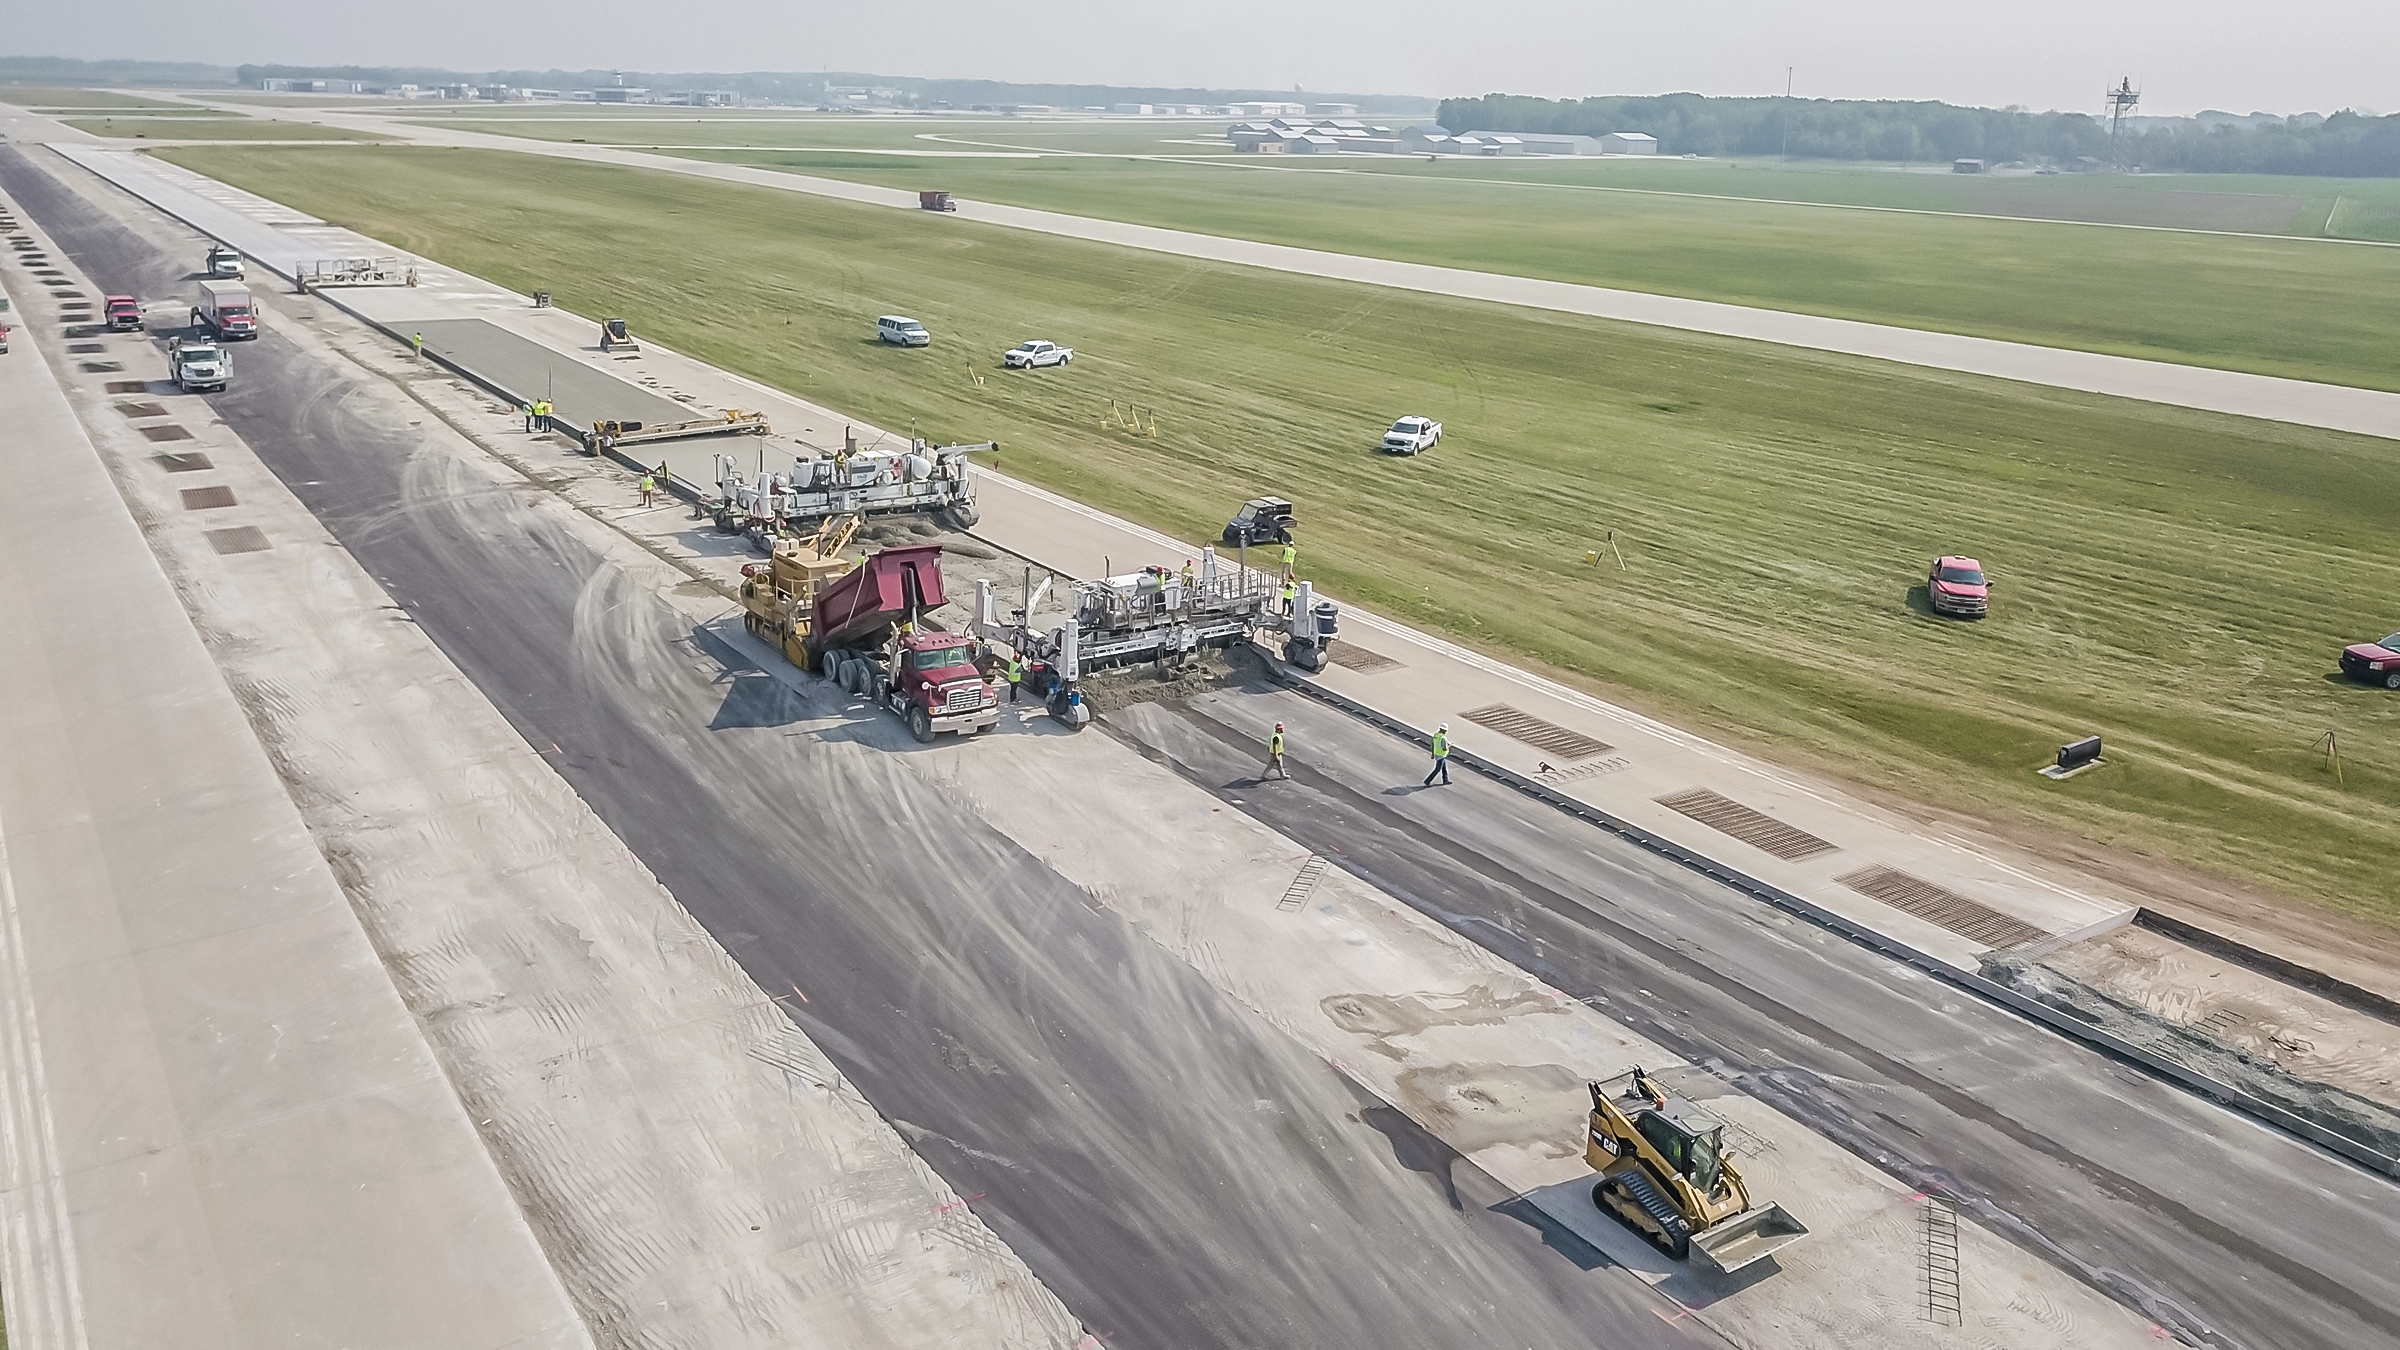 A Michels Road and Stone crew paves a runway at the Green Bay, WI airport.